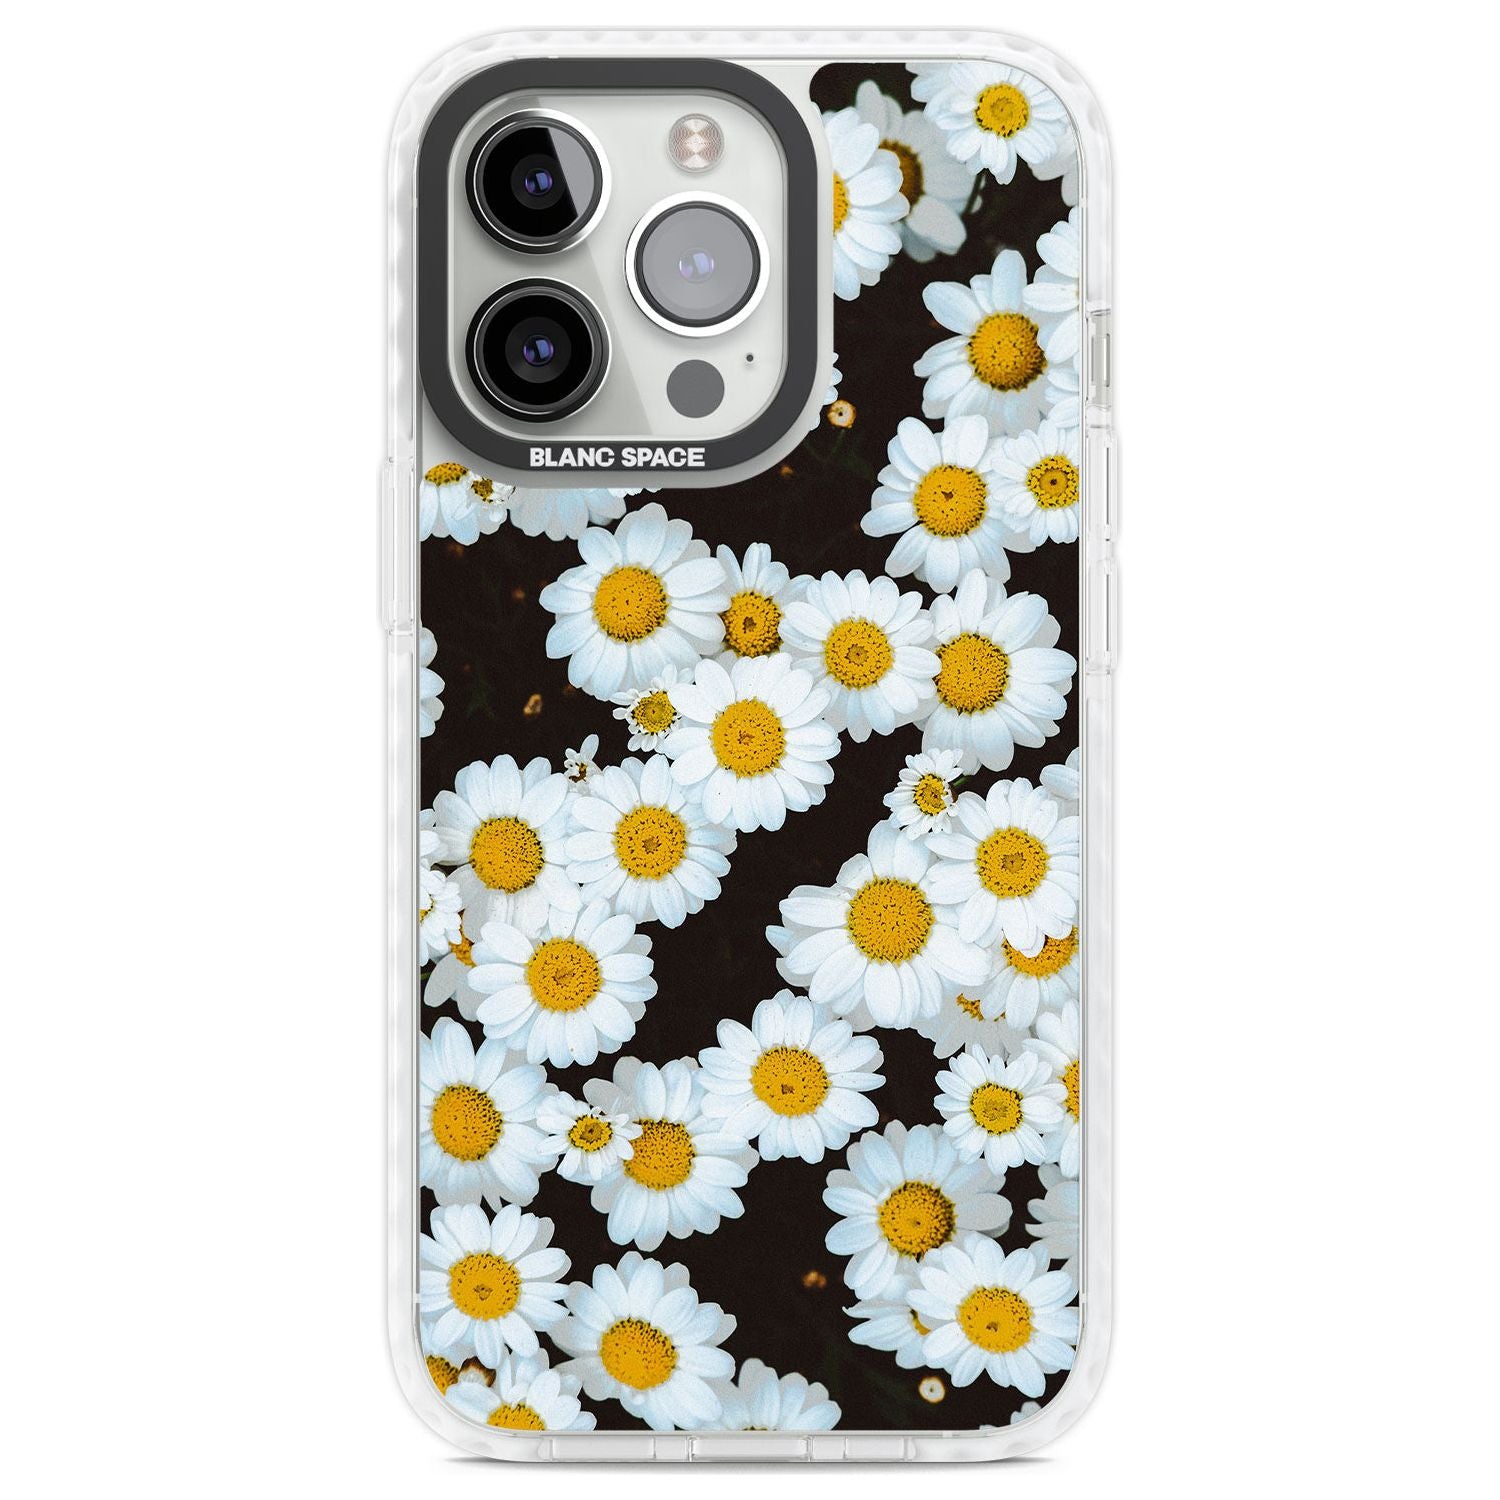 Daisies - Real Floral Photographs Phone Case iPhone 13 Pro / Impact Case,iPhone 14 Pro / Impact Case,iPhone 15 Pro Max / Impact Case,iPhone 15 Pro / Impact Case Blanc Space